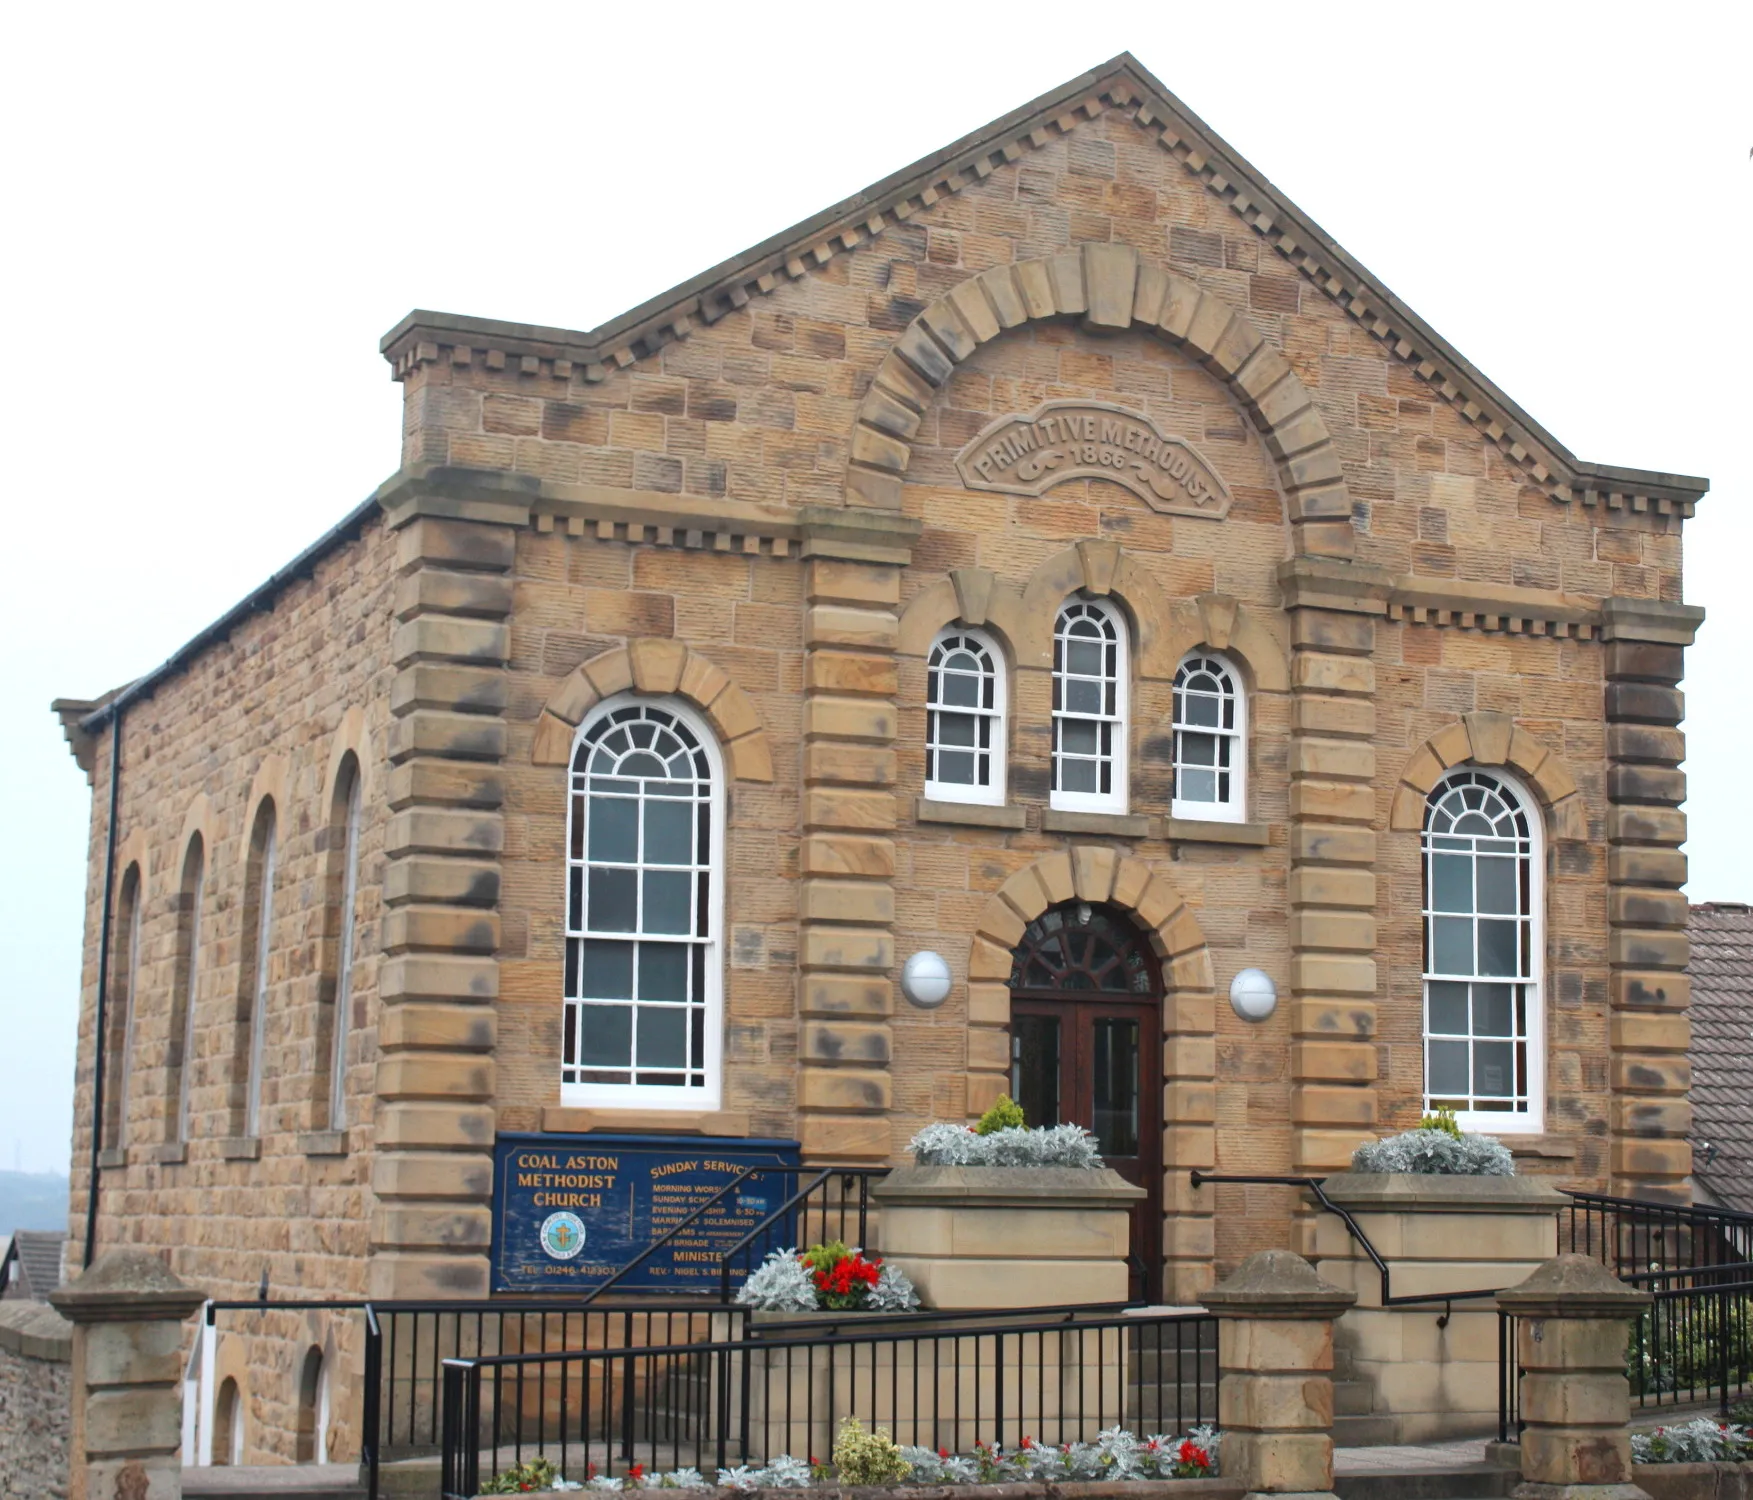 Photo showing: The Methodist Chapel in Coal Aston, Derbyshire, England.